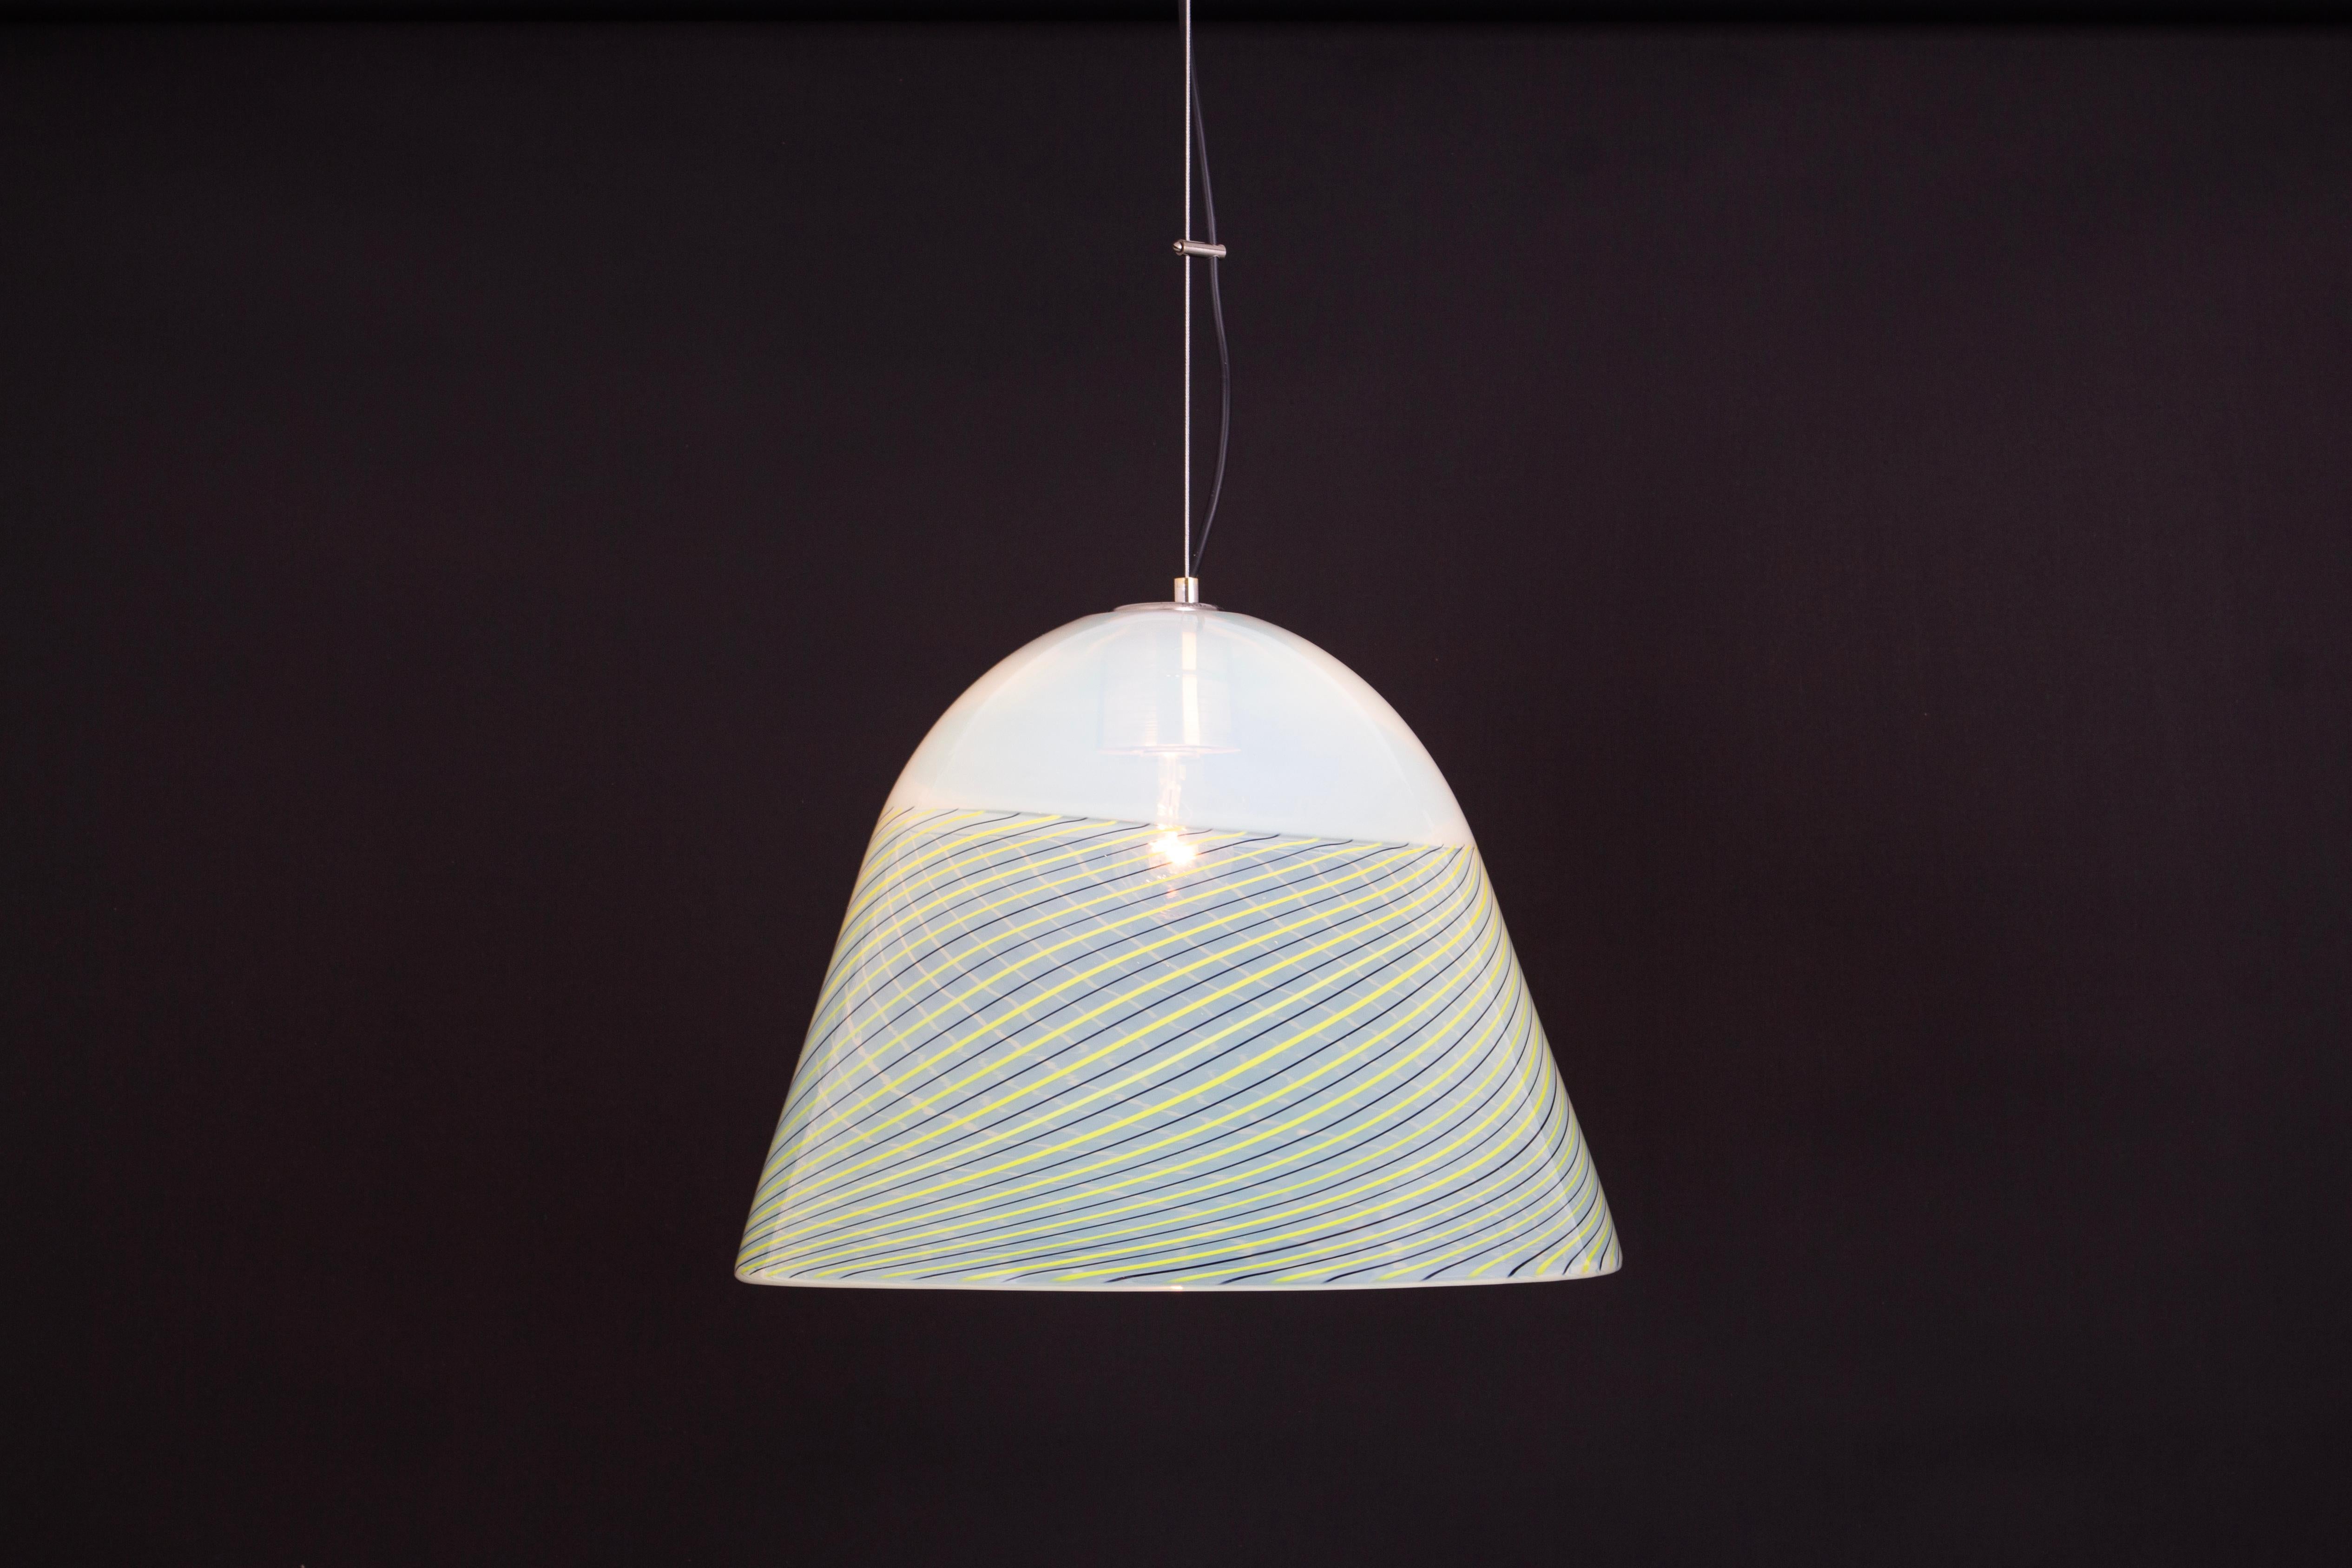 Large Pendant Light in style of Kalmar-Fazzoletto, Italy, 1970s For Sale 4